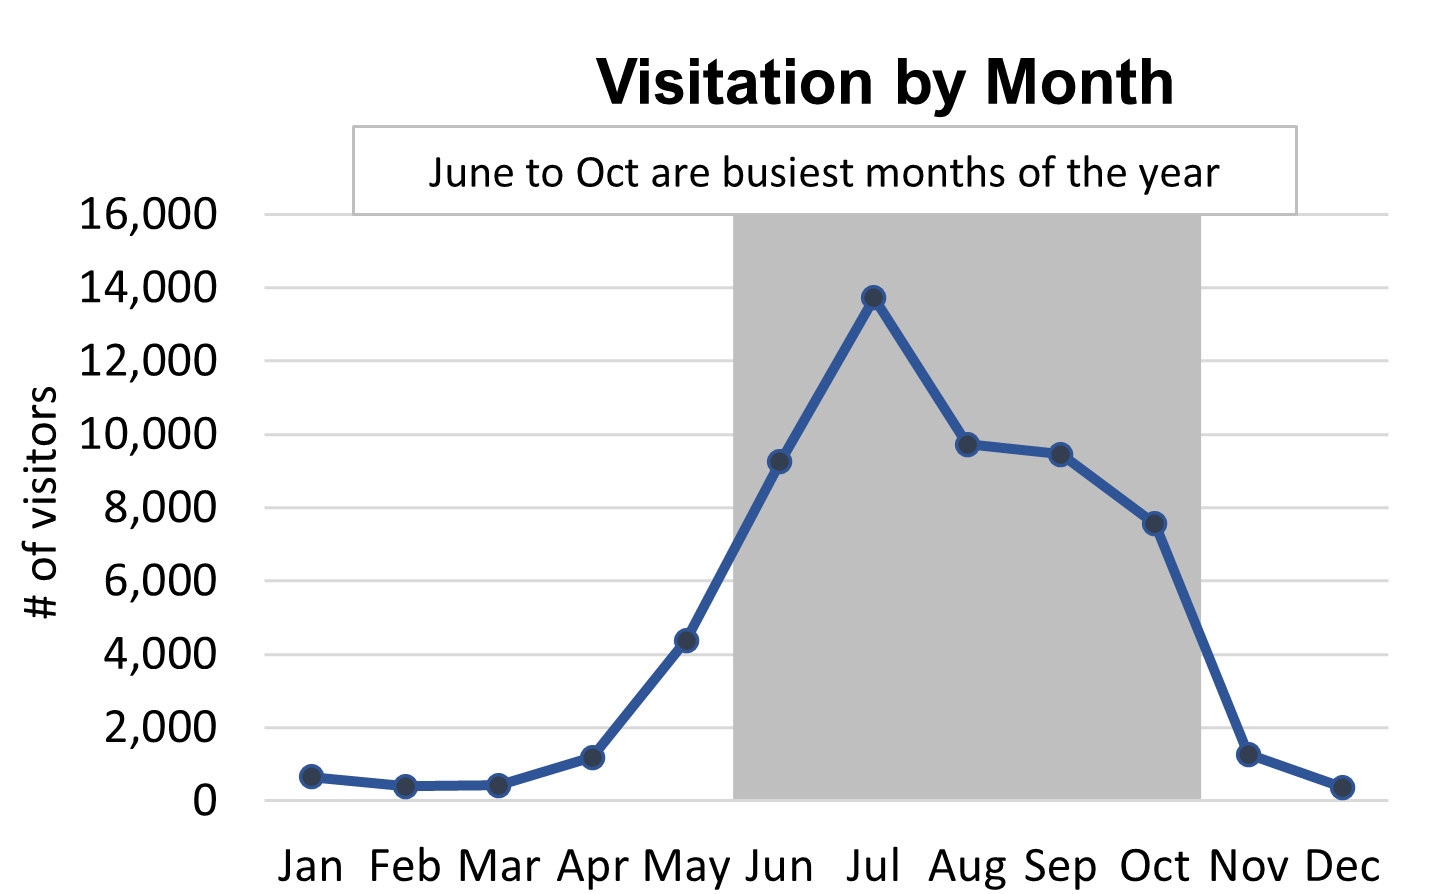 Line graph showing June through October are the busiest months of the year with July being the busiest month